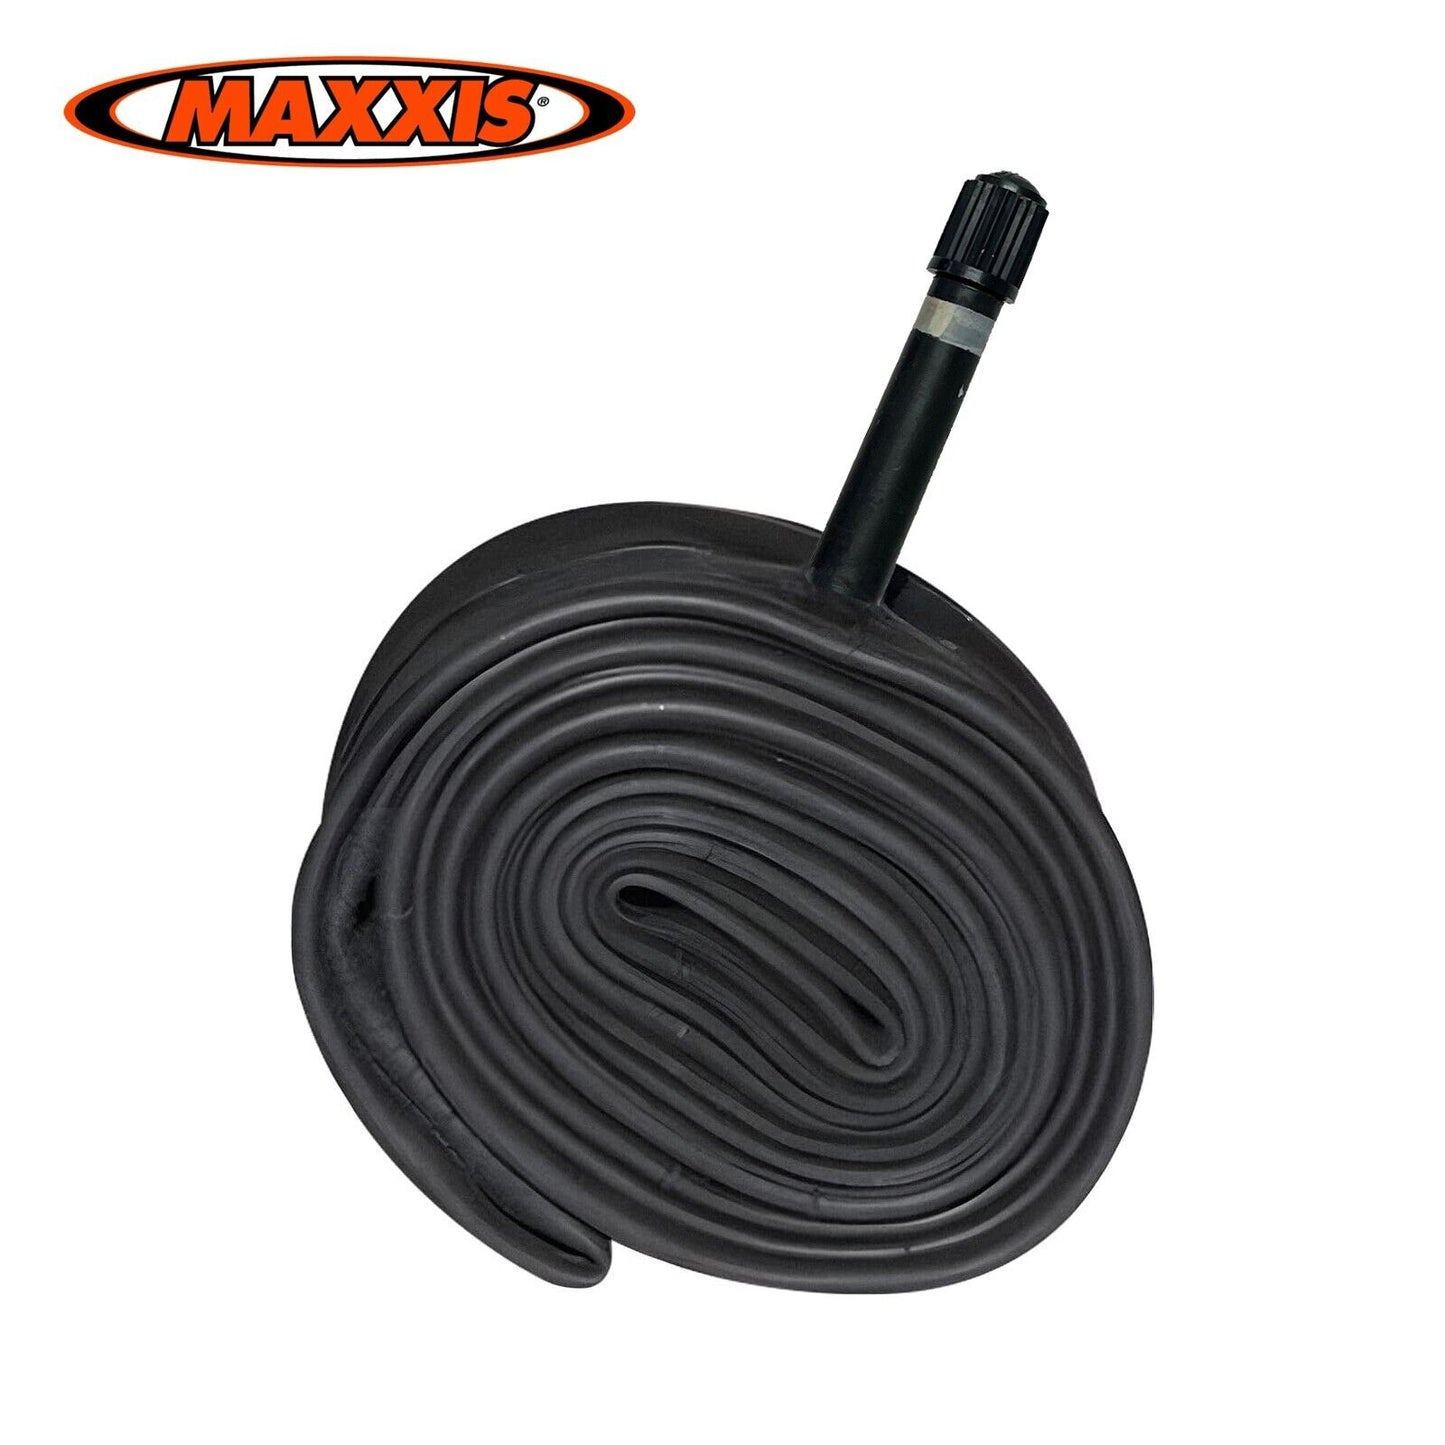 Maxxis 29 Inch x 1.75" - 2.40" Bike Bicycle Inner Tube for Tyre Tubes 29 x 2.25